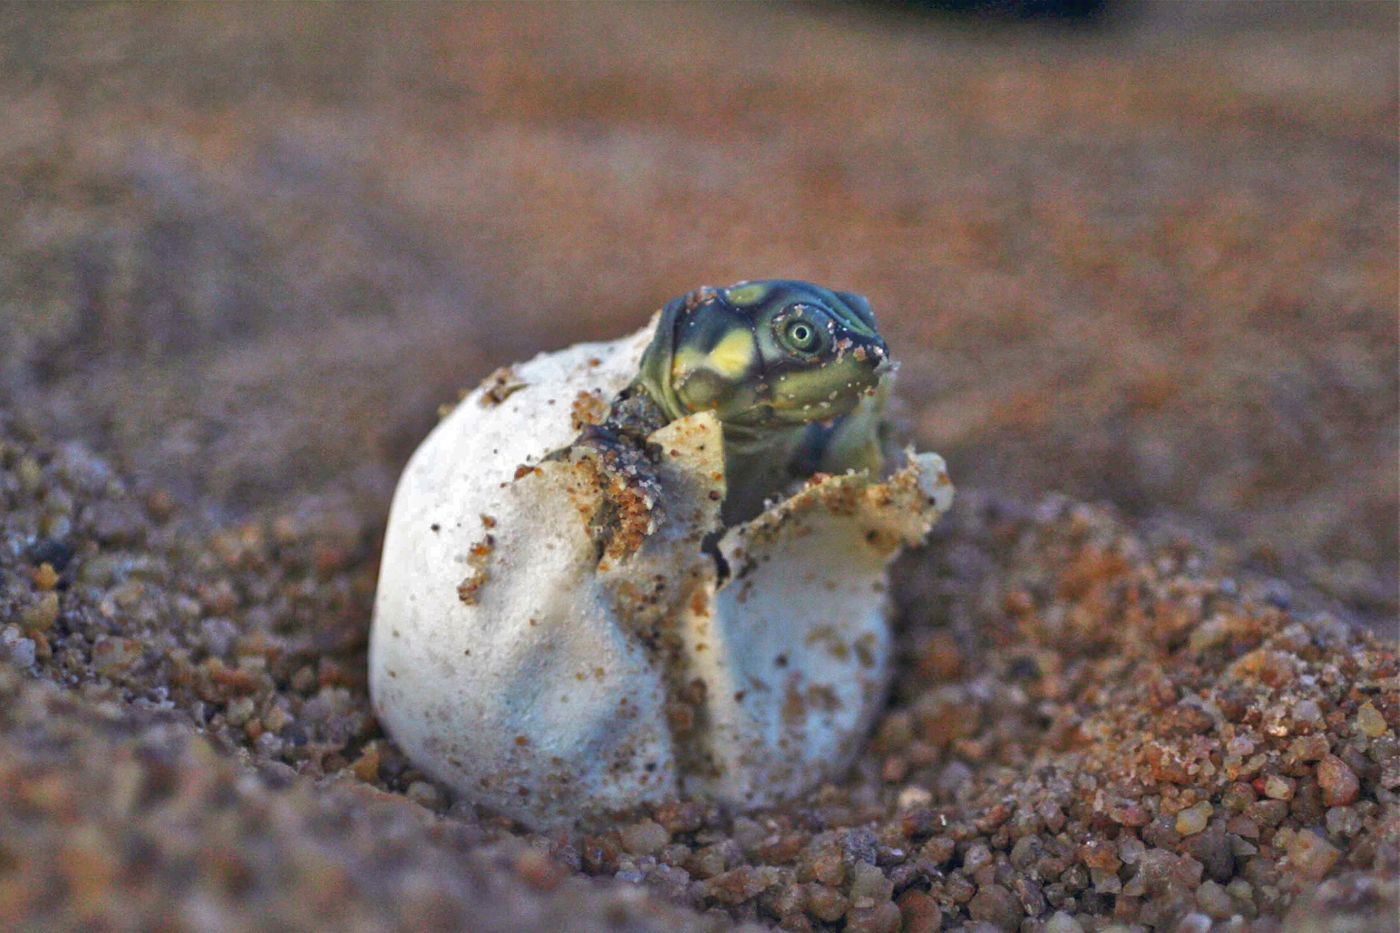 Giant South American Turtle hatchlings are making a comeback thanks to local conservation efforts.